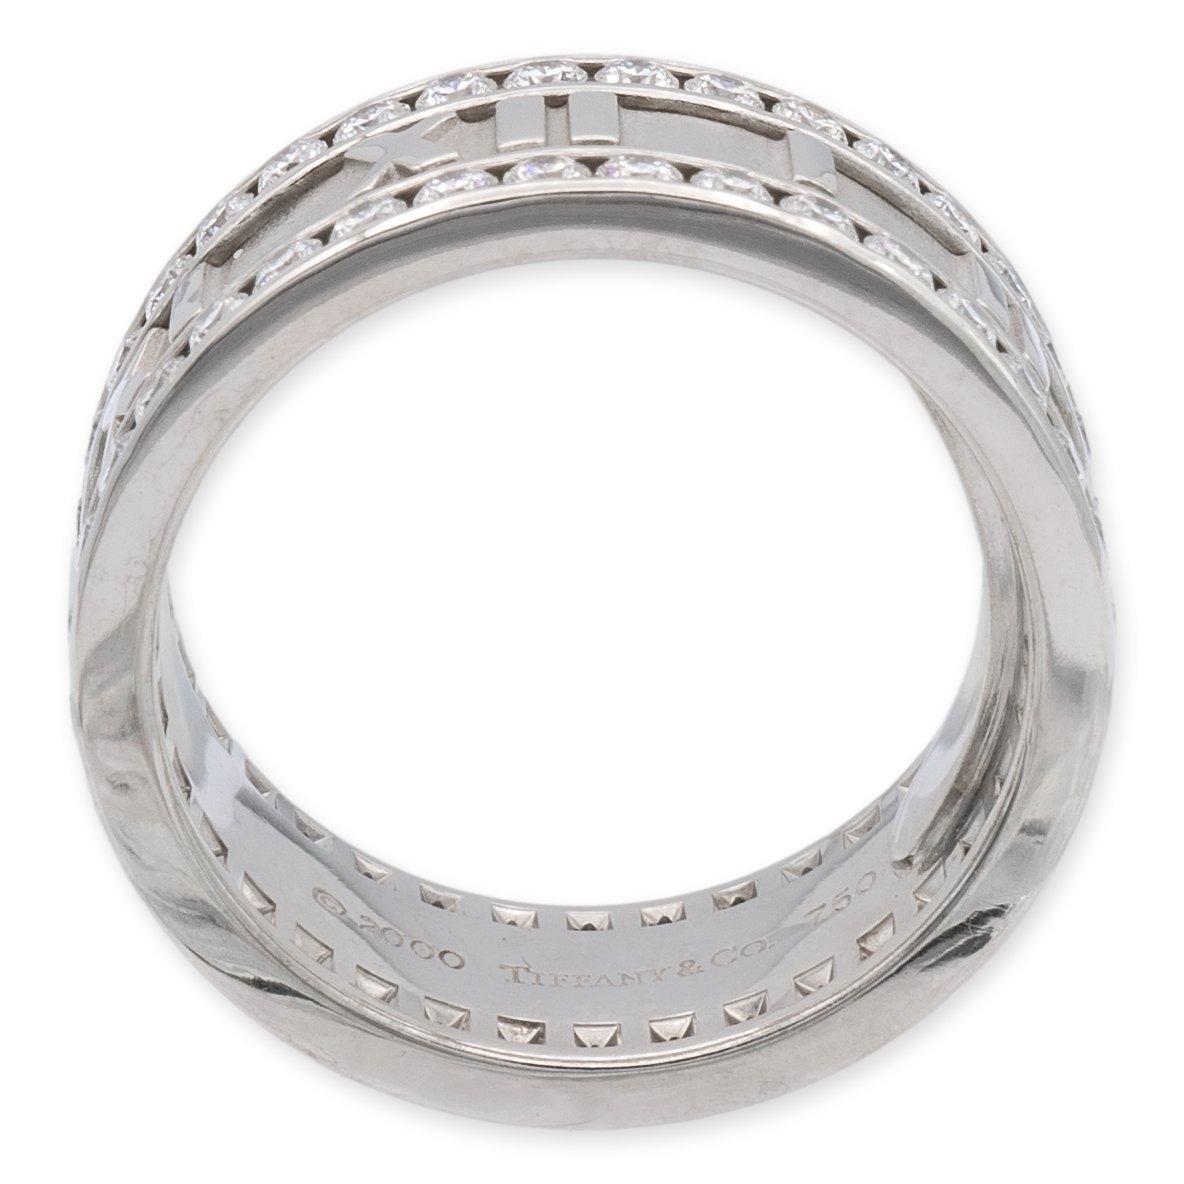 85 mm ring size